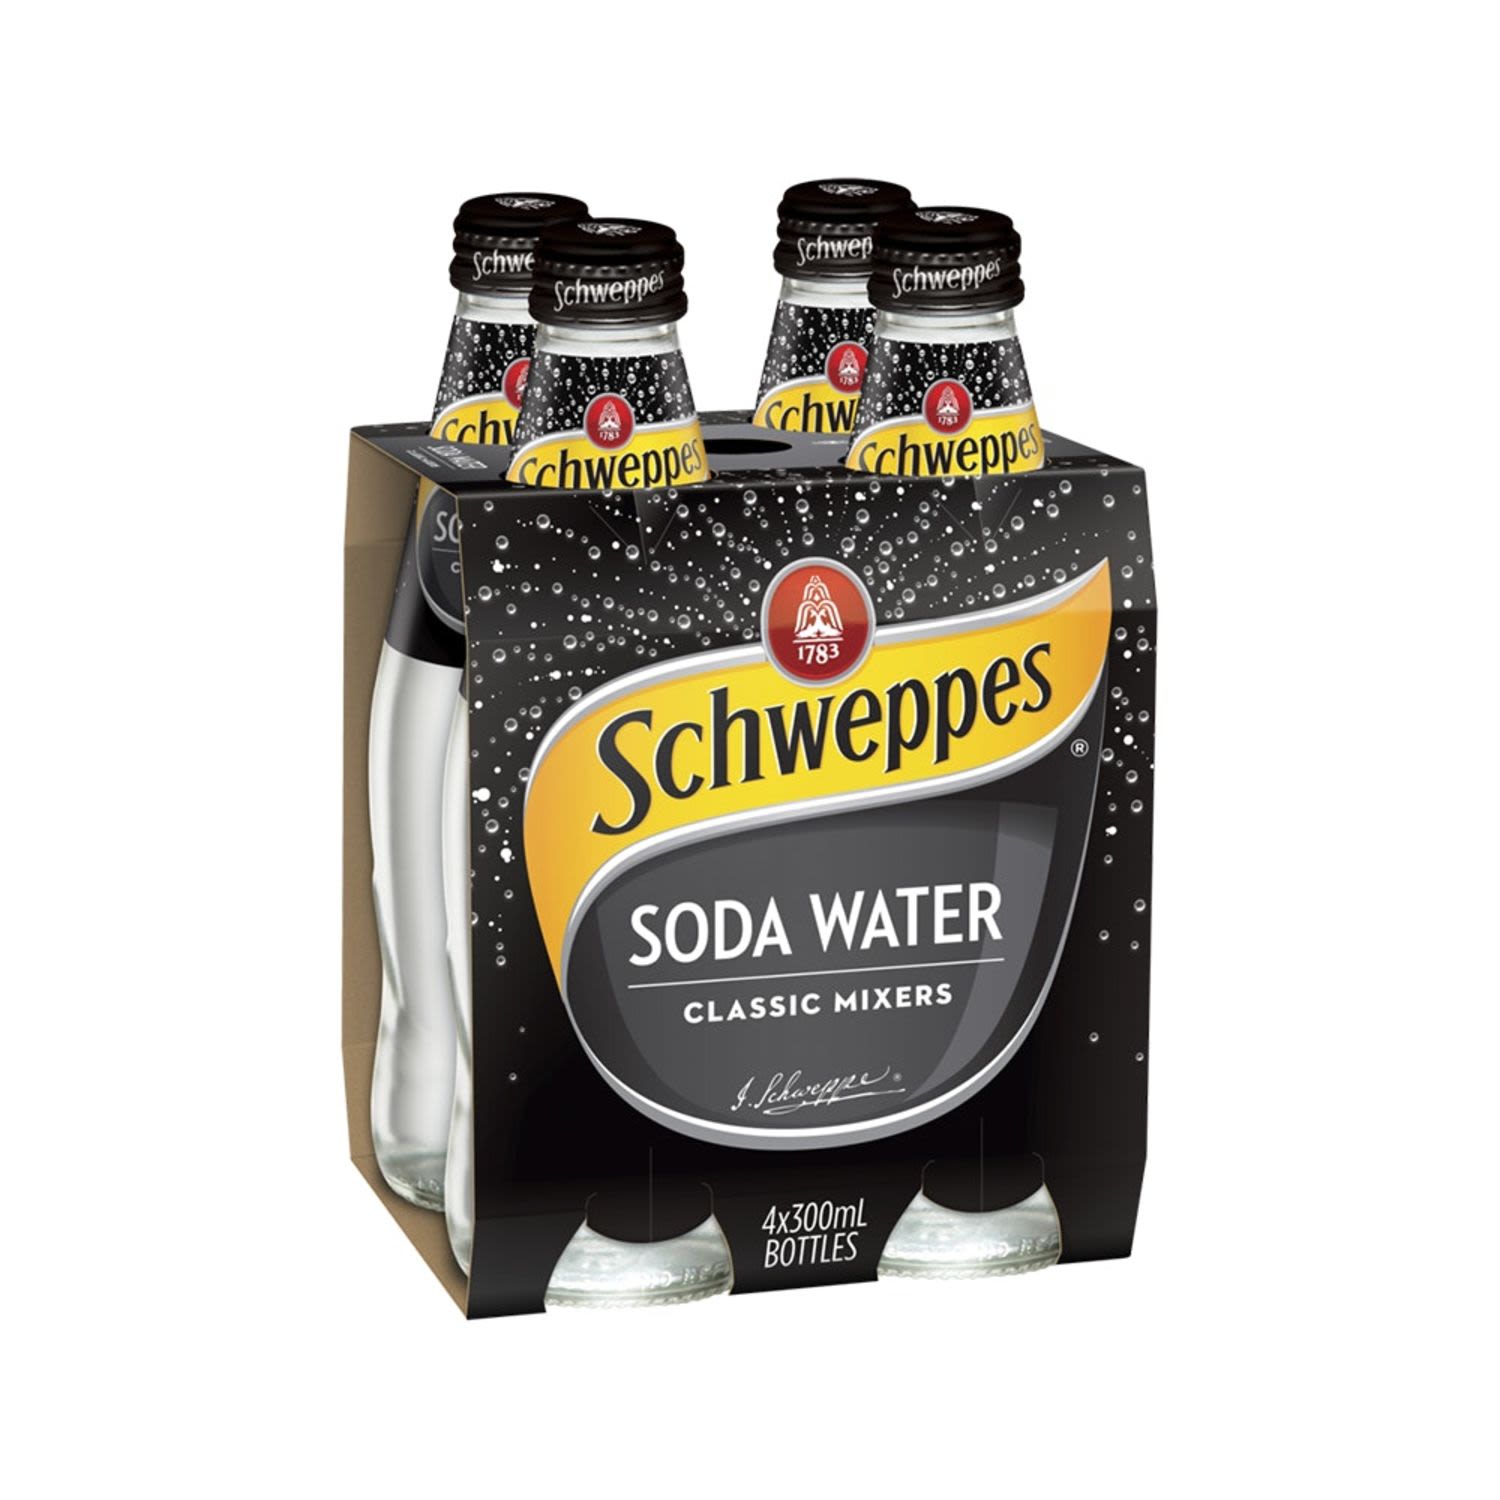 In 1783, Jacob Schweppe perfected the process of aerating water, bringing to life sparkling beverages as we know them today. 235 years on, Schweppes Soda Water is forged through the blending of mineral salts with pristine triple filtered water, before being infused with thousands of delicate bubbles known as “Schweppervescence”.<br /> <br />Pack Format: 4 Pack<br /><br />Pack Type: Bottle<br />